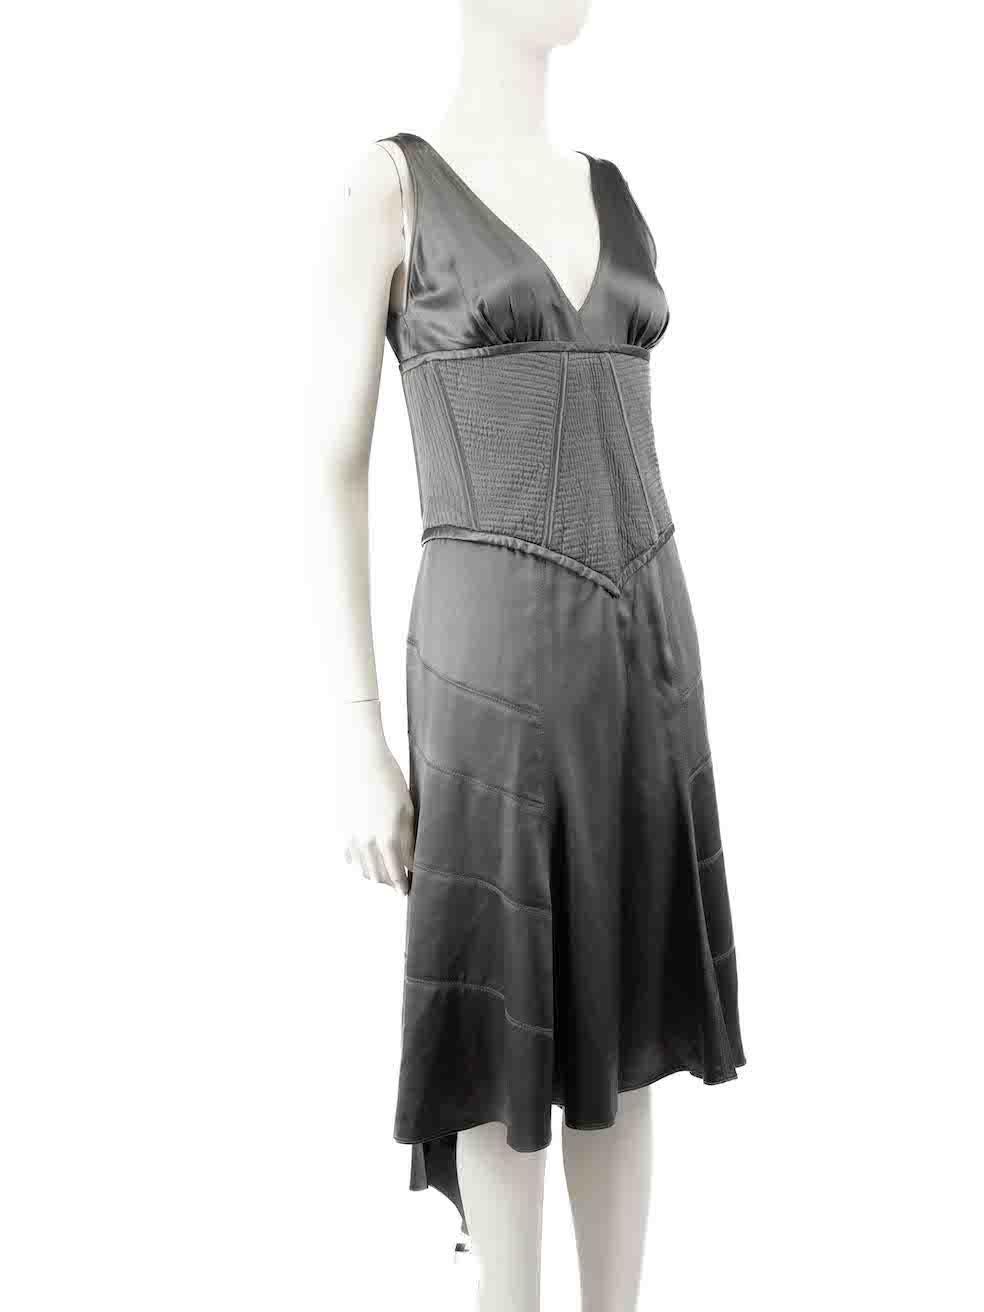 CONDITION is Good. General wear to dress is evident. Moderate signs of wear to the stitching inside the neckline with a small tear seen near the bottom of the side zip on this used Amanda Wakeley designer resale item.
 
 
 
 Details
 
 
 Grey
 
